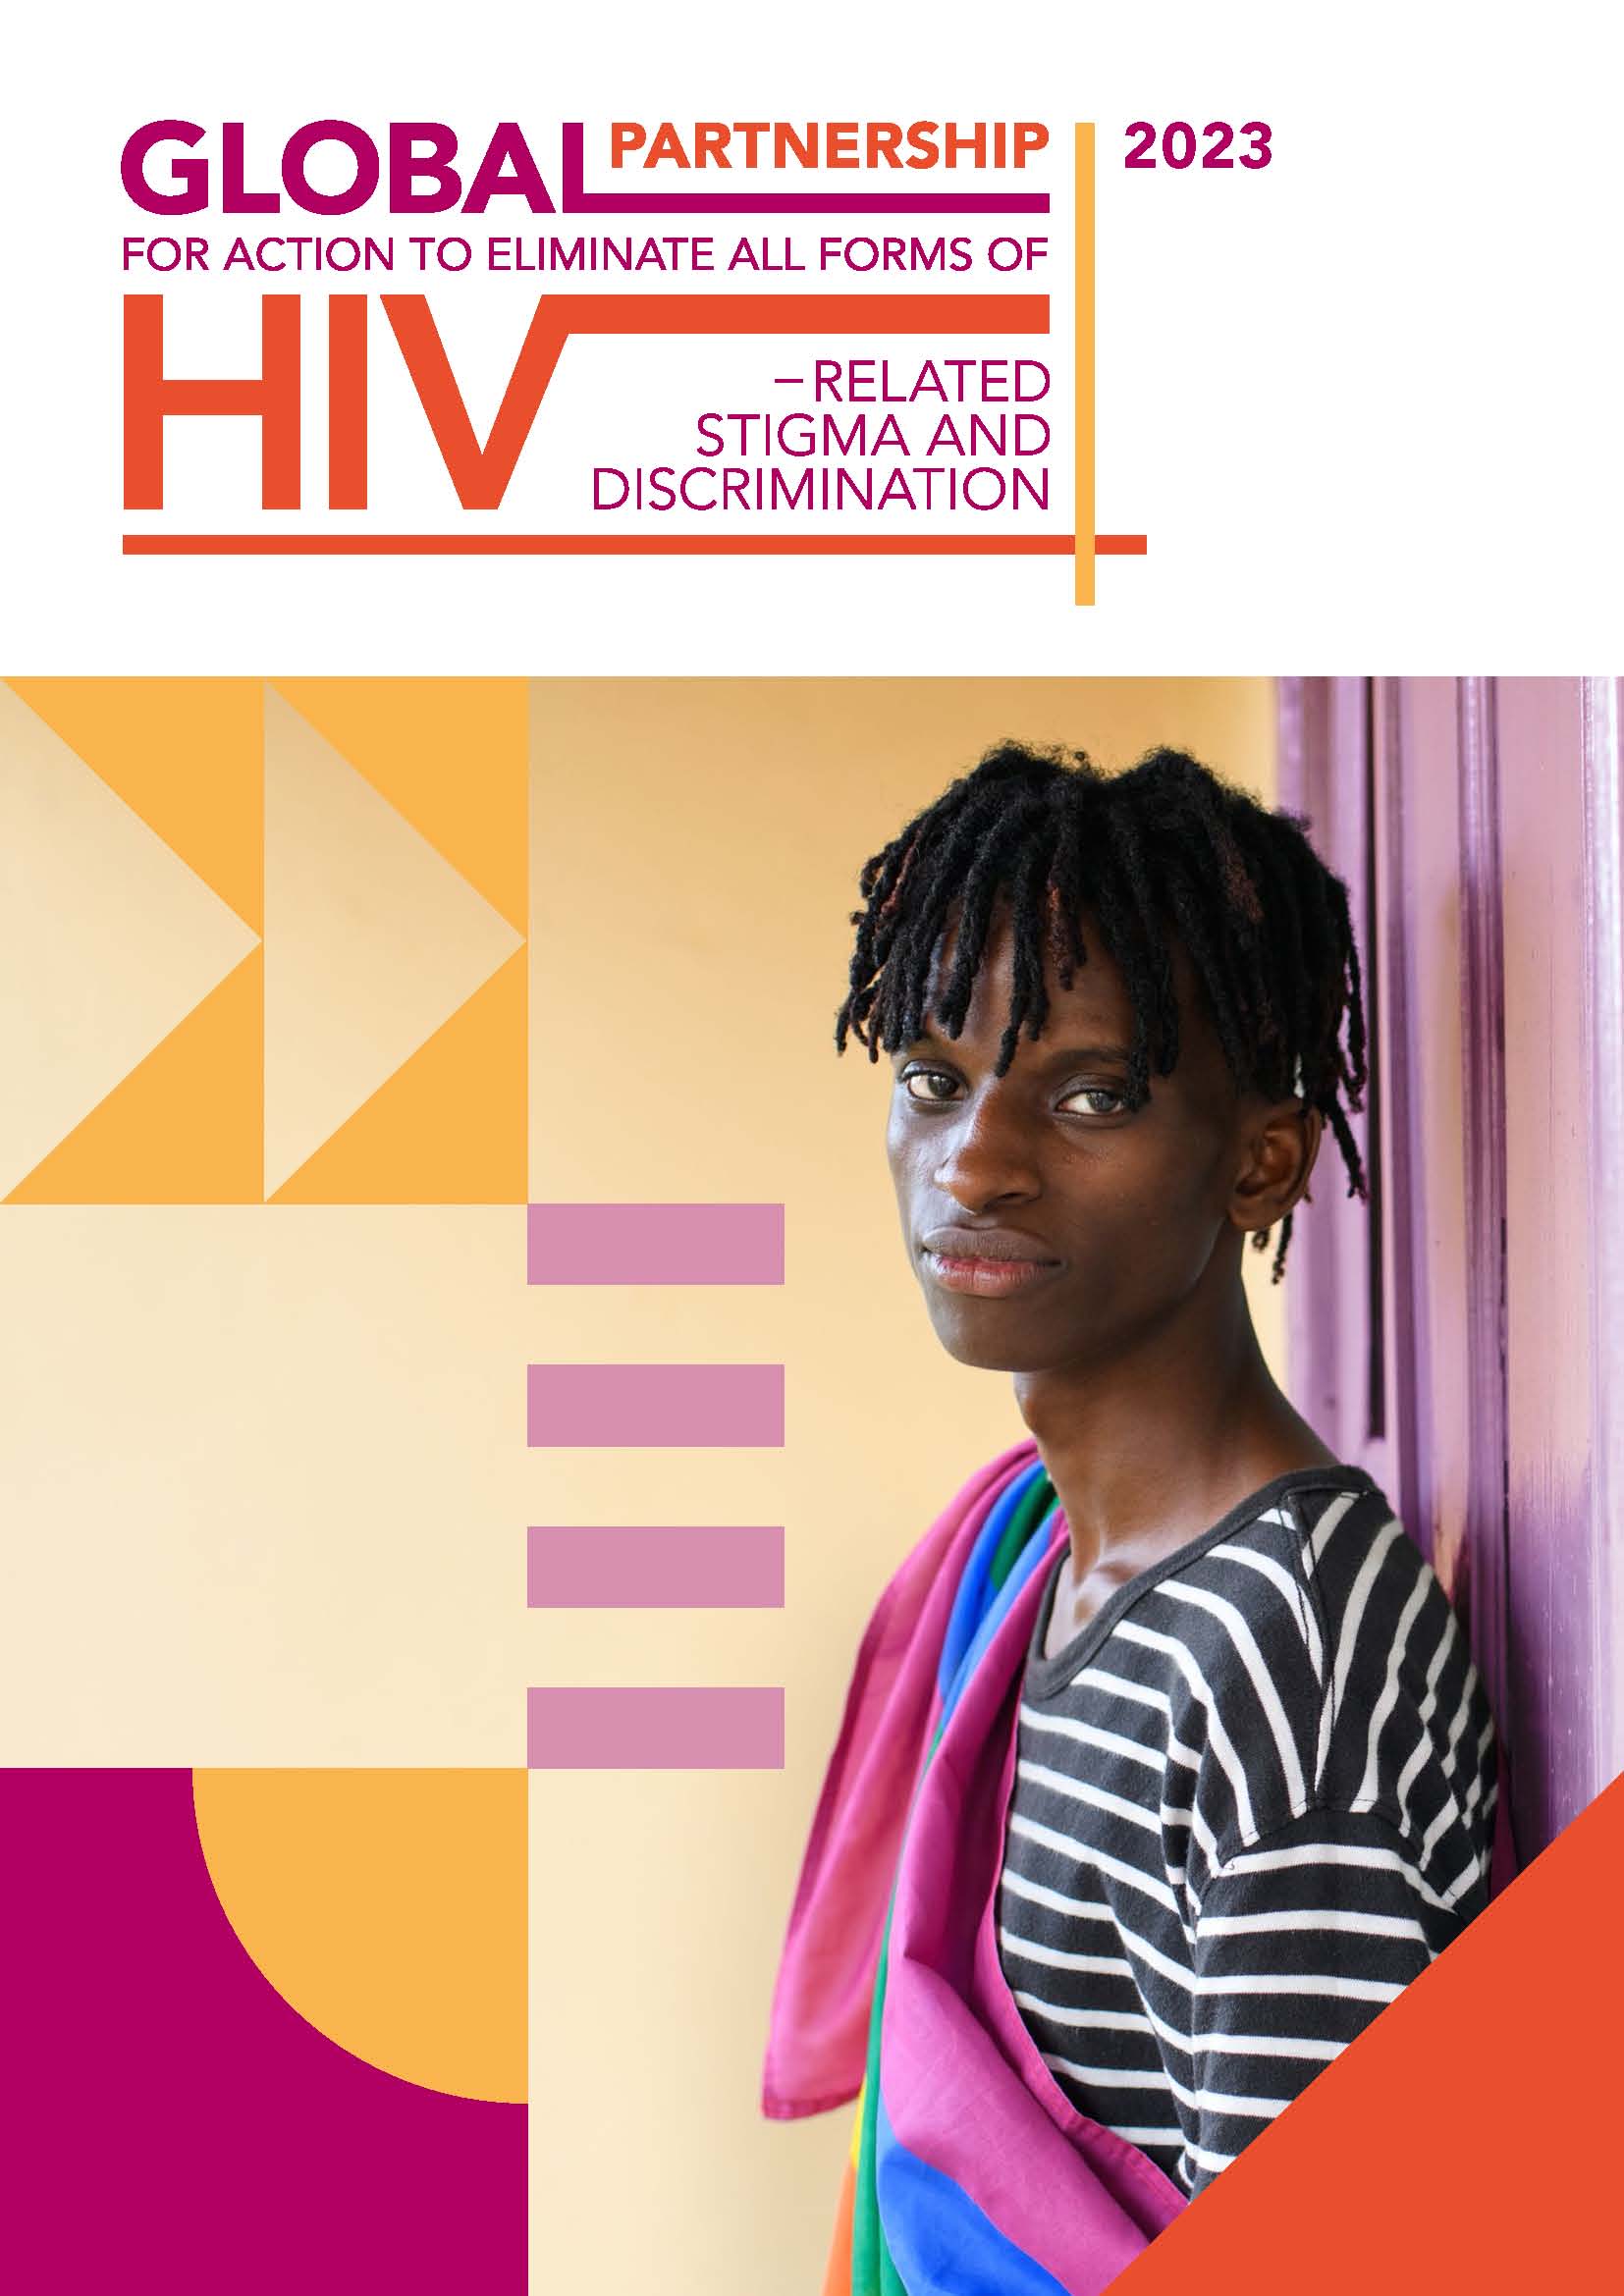 Global partnership for action to eliminate all forms of HIV-related stigma